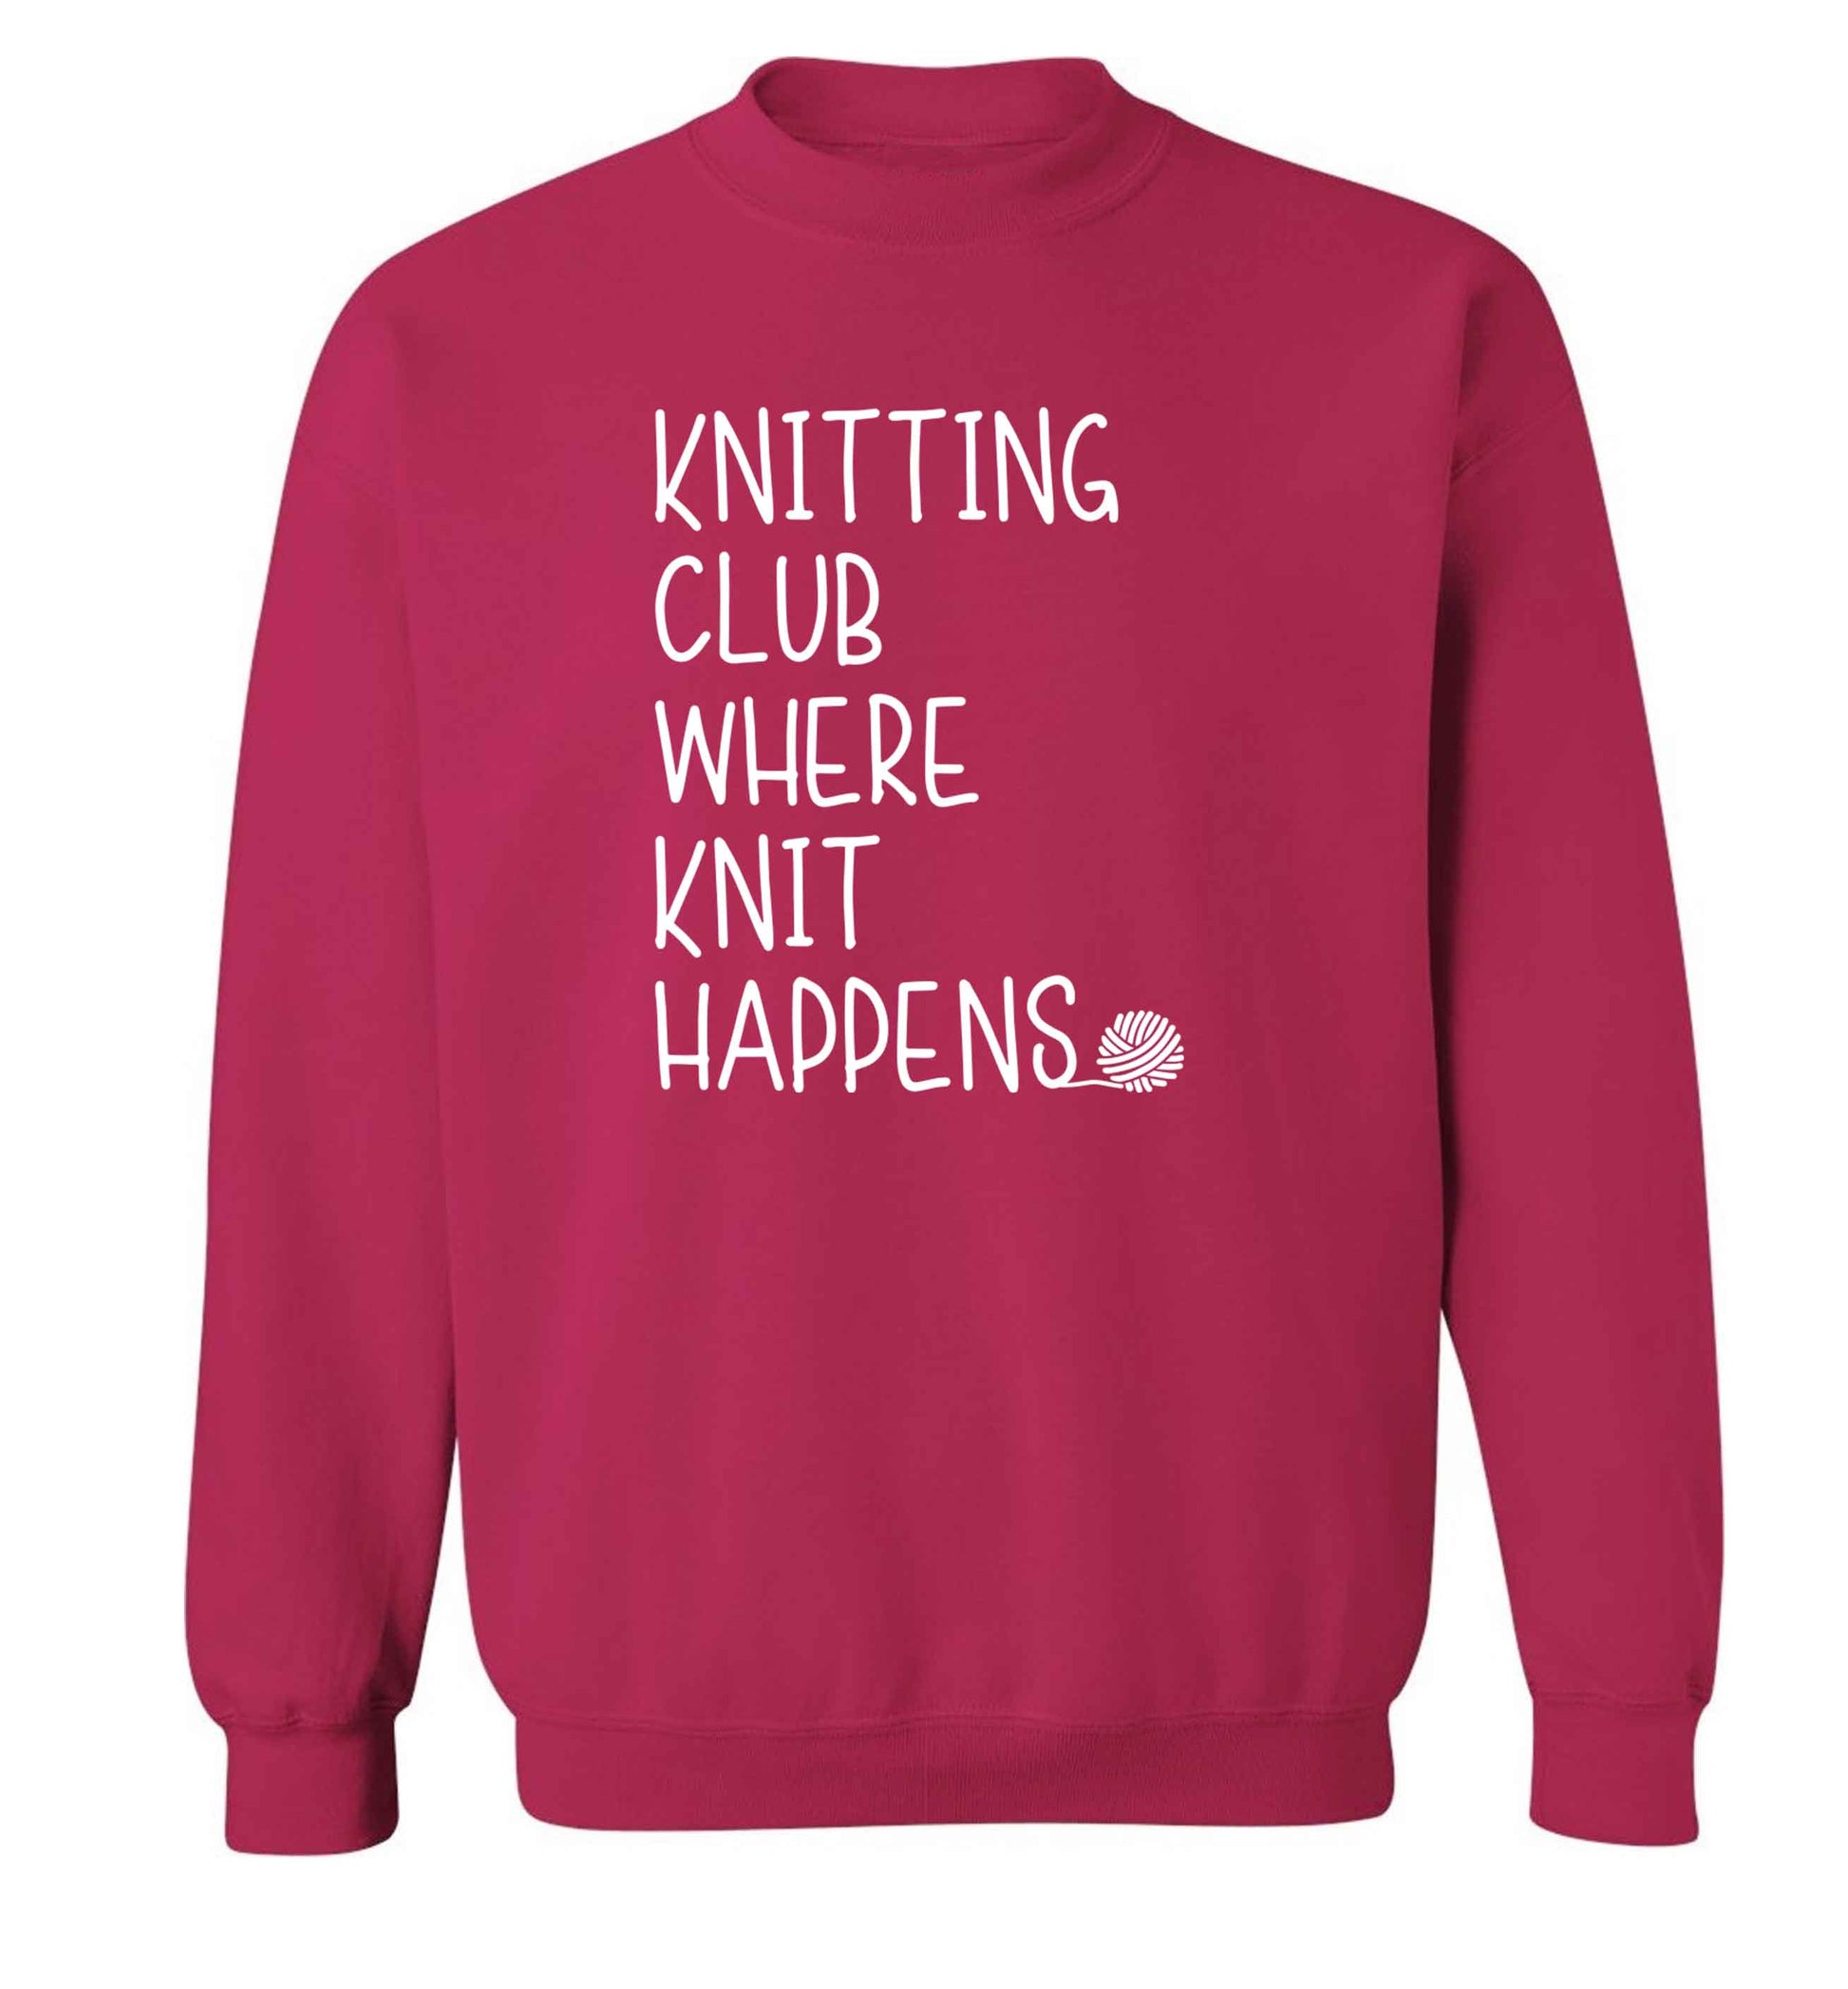 Knitting club where knit happens adult's unisex pink sweater 2XL